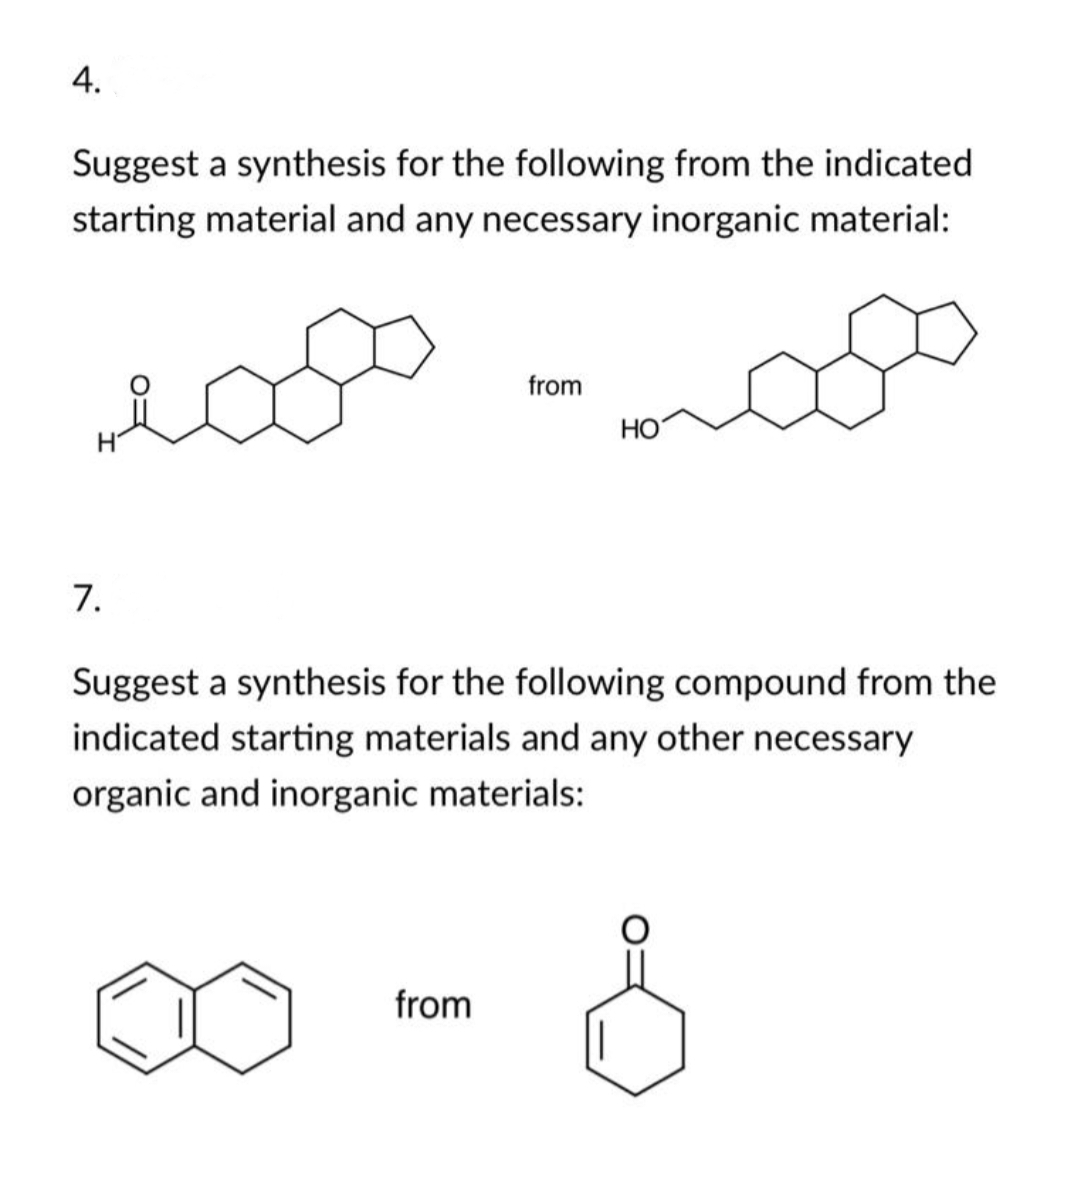 4.
Suggest a synthesis for the following from the indicated
starting material and any necessary inorganic material:
from
HO
7.
Suggest a synthesis for the following compound from the
indicated starting materials and any other necessary
organic and inorganic materials:
from